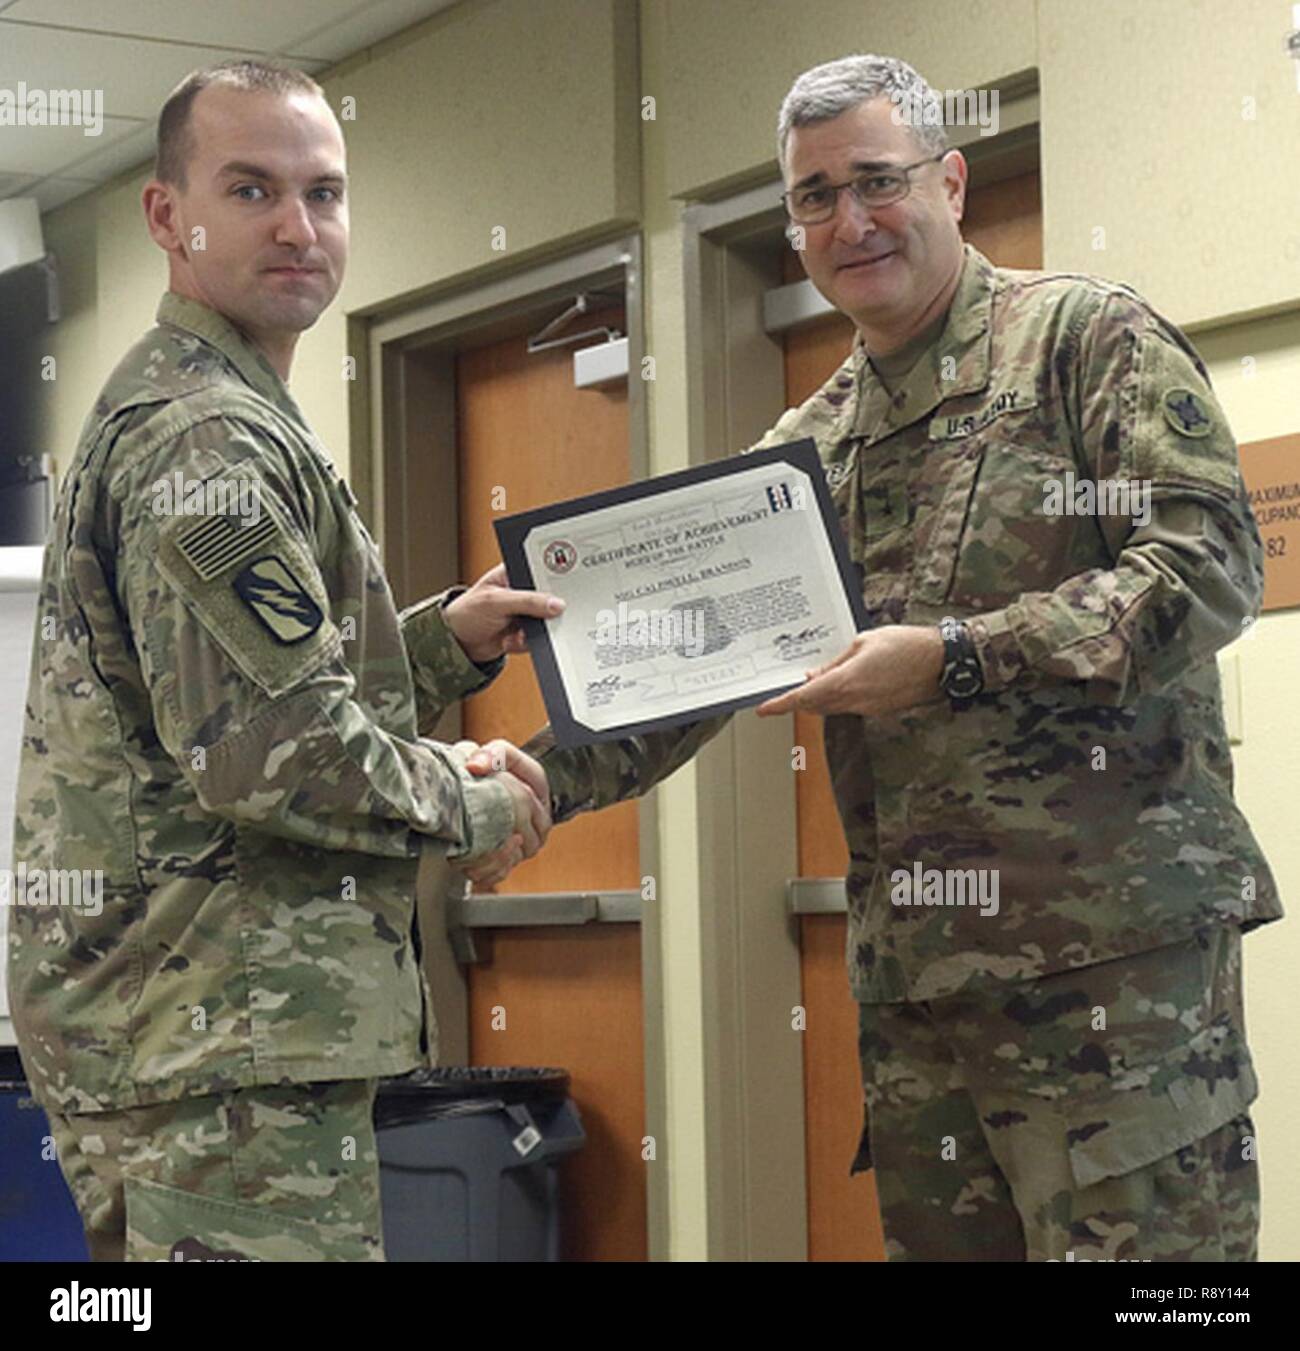 Staff Sgt. Brandon Caldwell, 184th Sustainment Command receives a Hero of The Battle certificate from Brig. Gen. Clint E. Walker, 184 SC commander. Caldwell was awarded for his professionalism and proficiency during the units validation for the upcoming deployment. Stock Photo